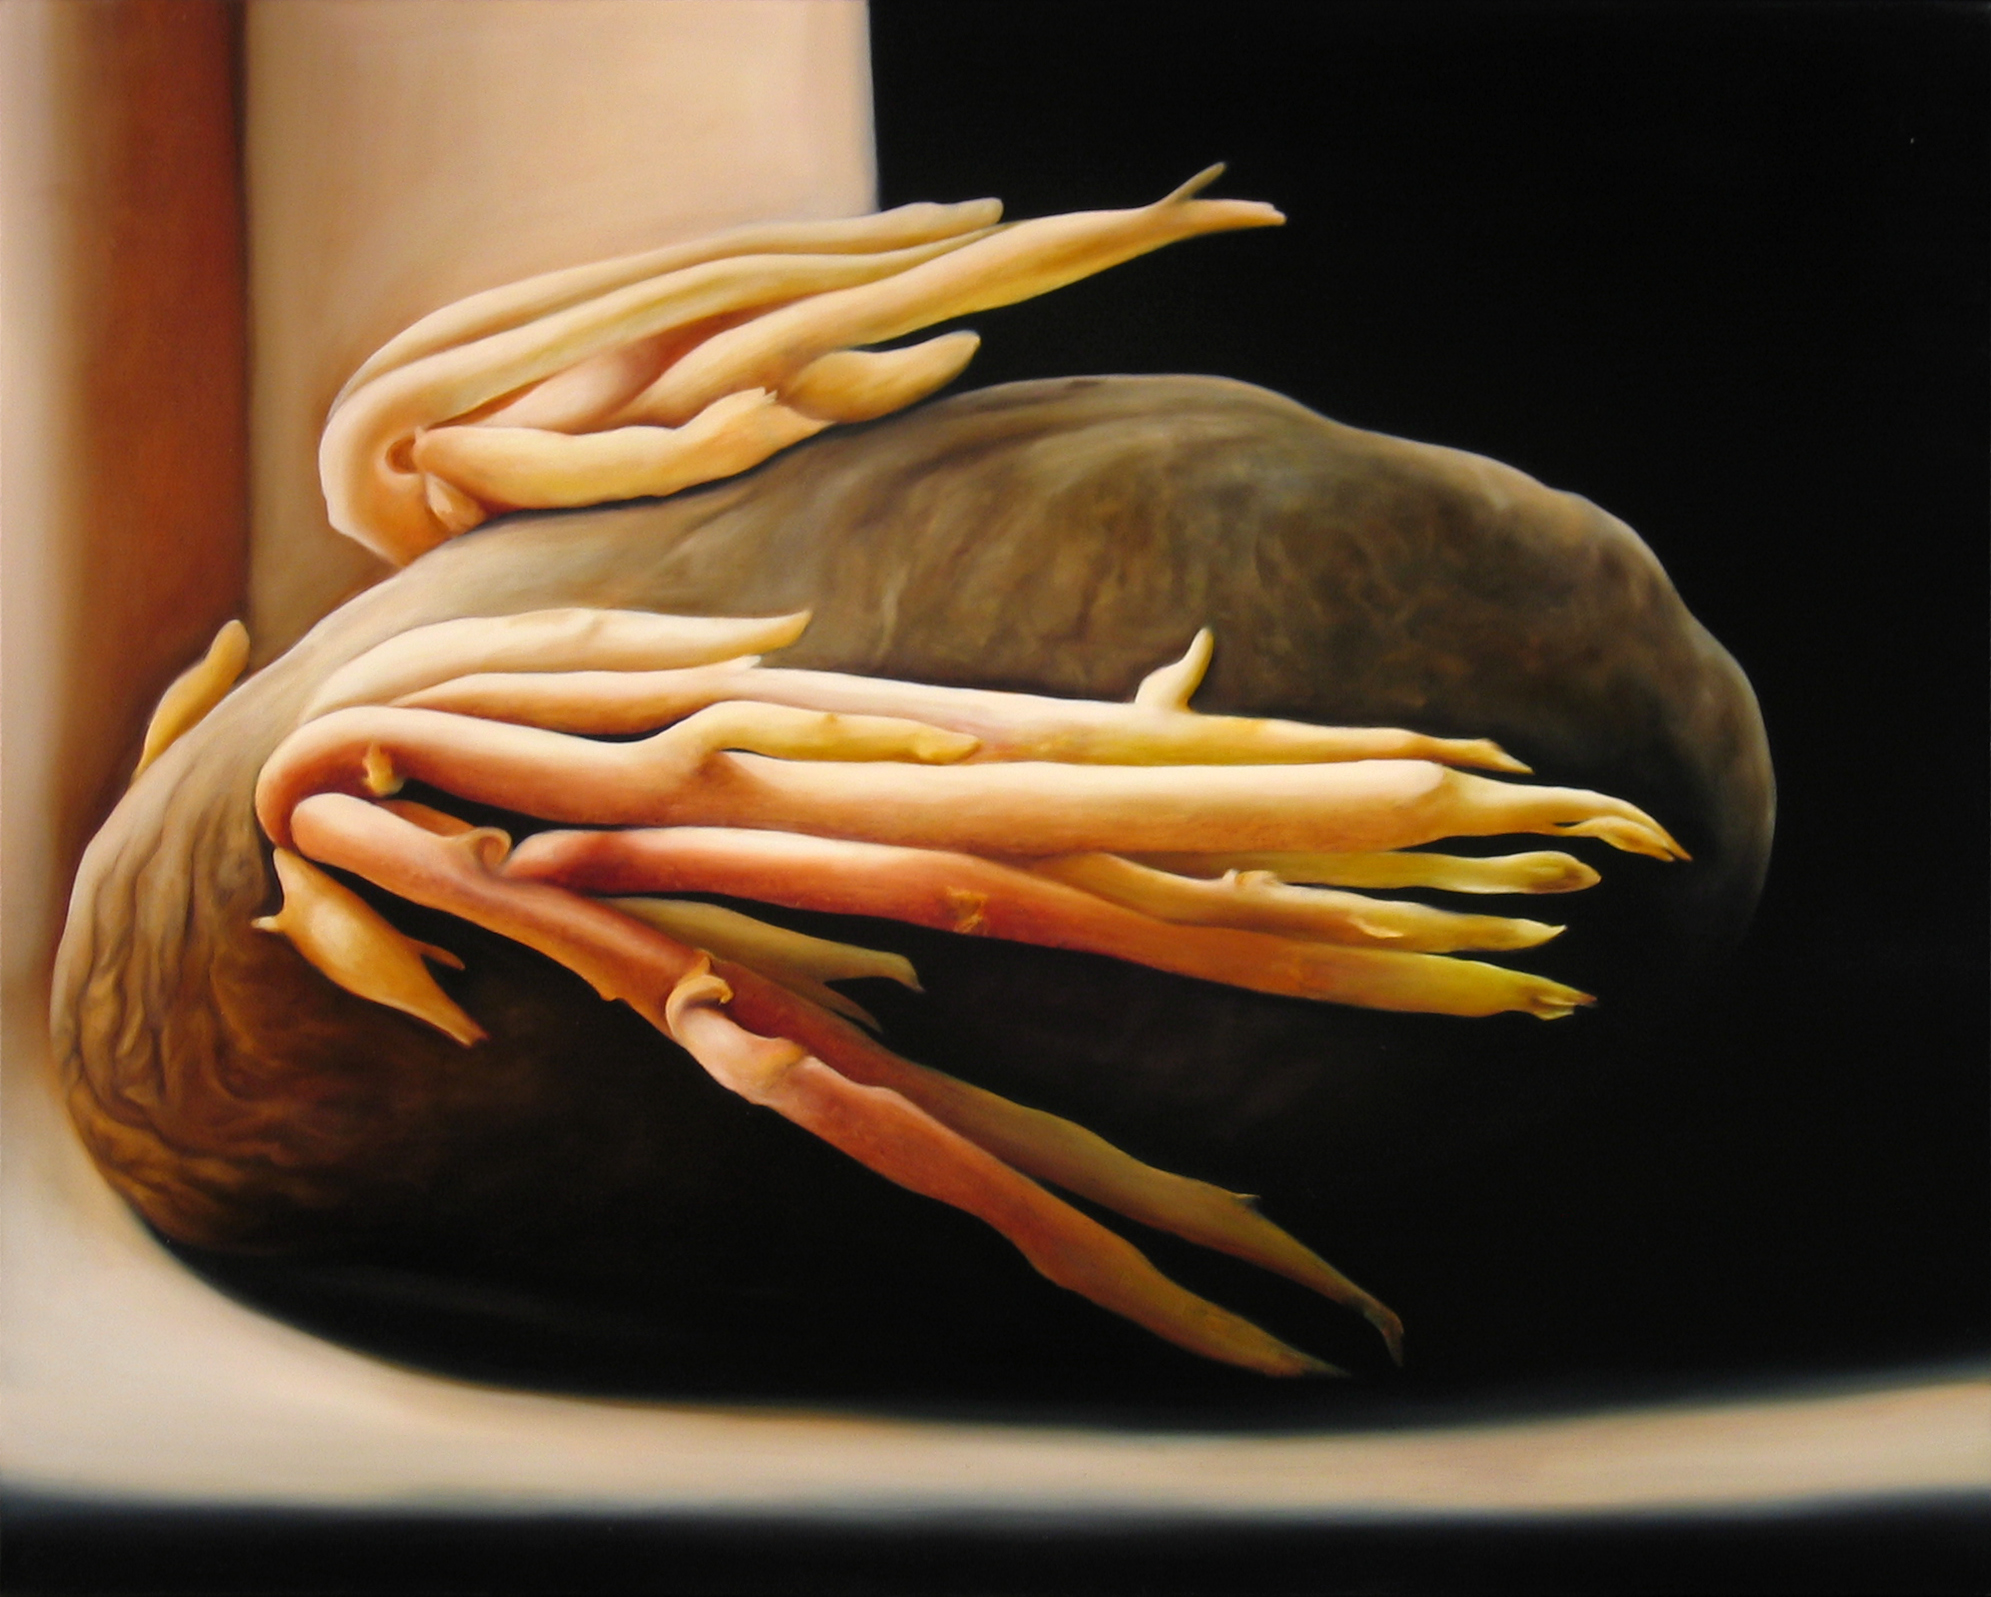 Introverted-Pursuit, 48" x 60", Oil on Canvas, 2006